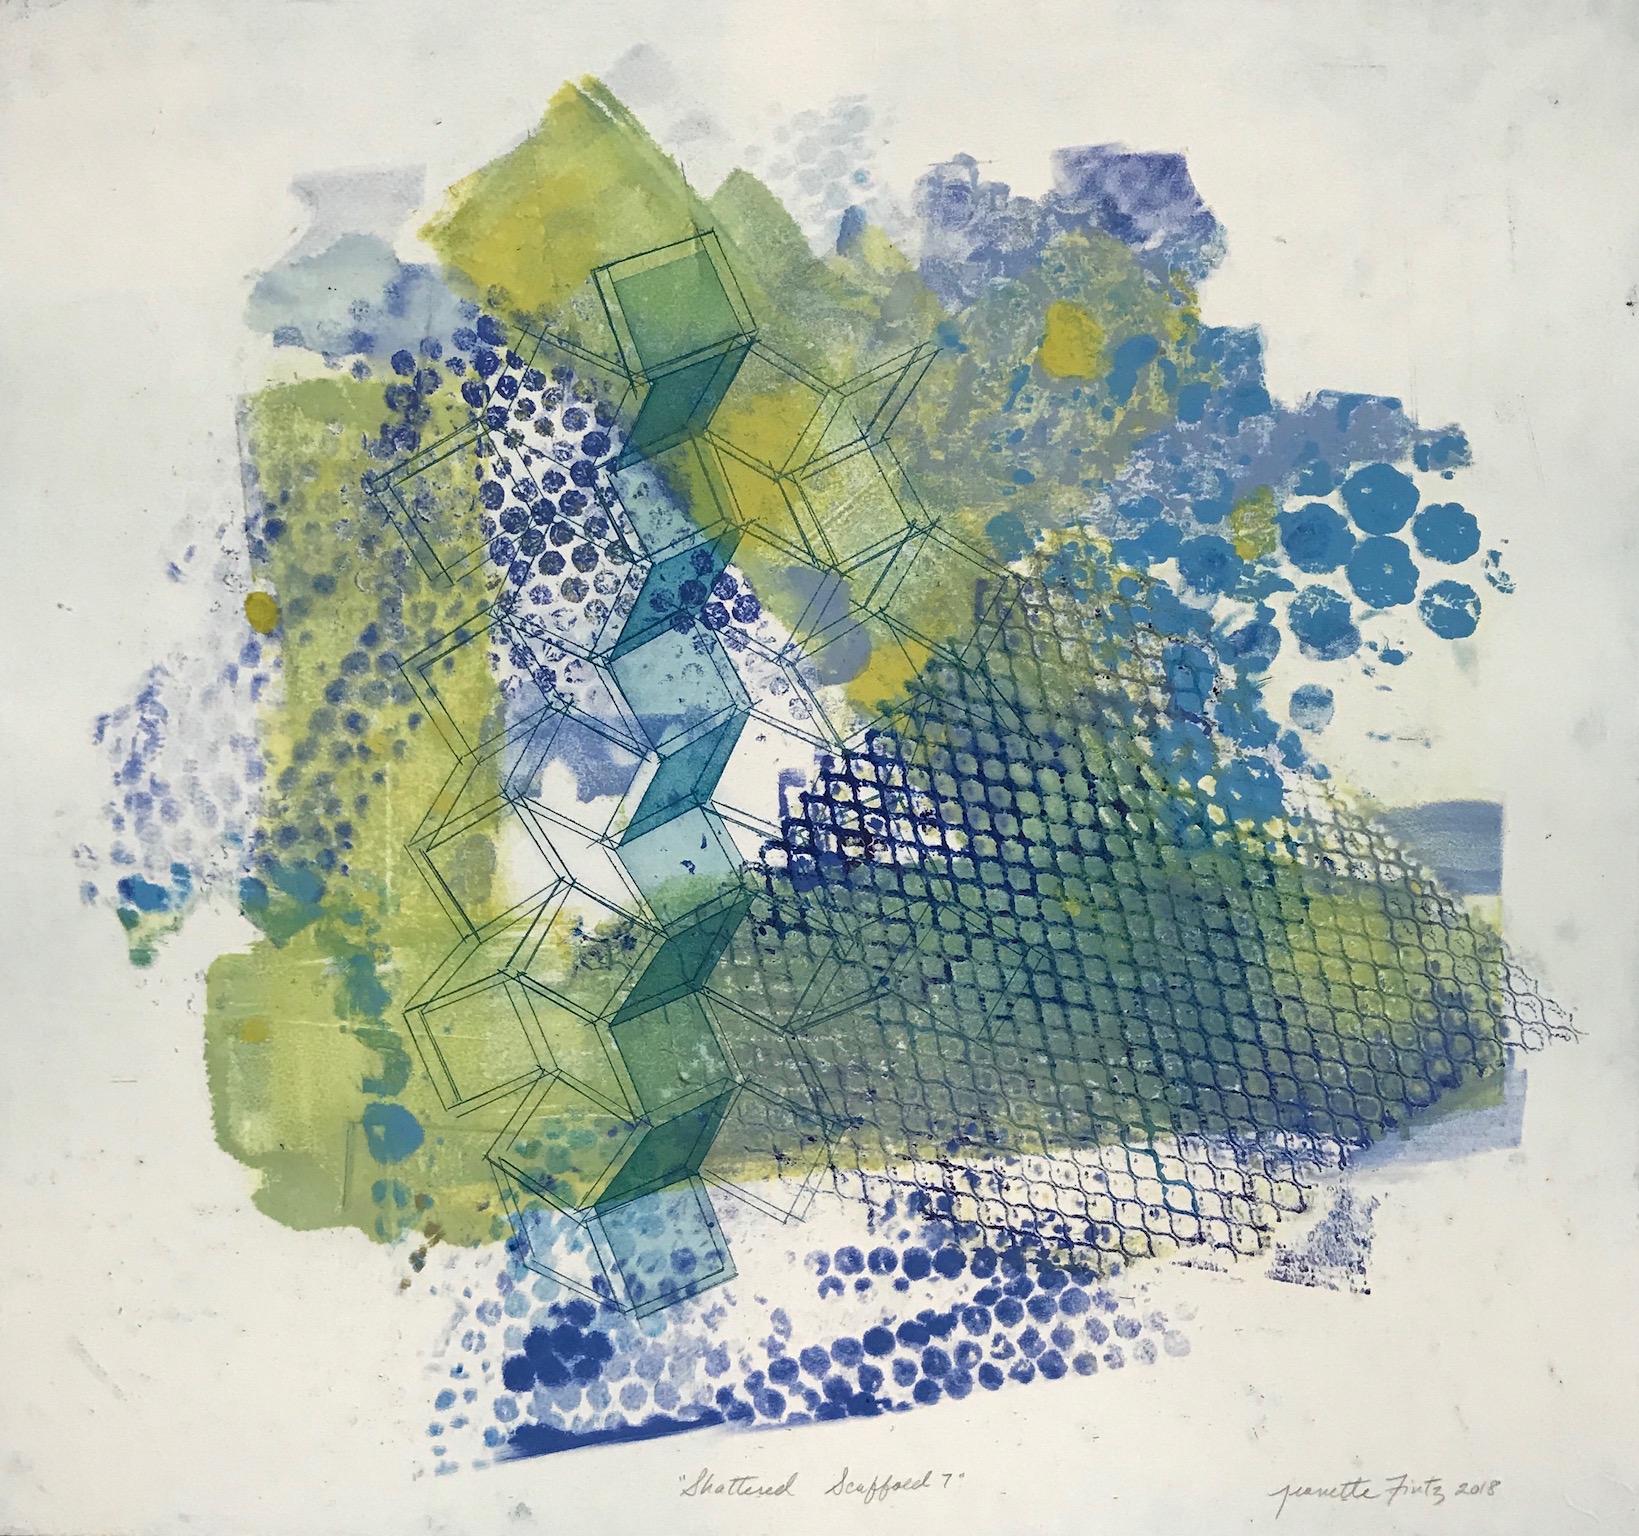 Jeanette Fintz Abstract Print - "Shattered Scaffold Seven", gestural abstract monoprint, blue, yellow green.